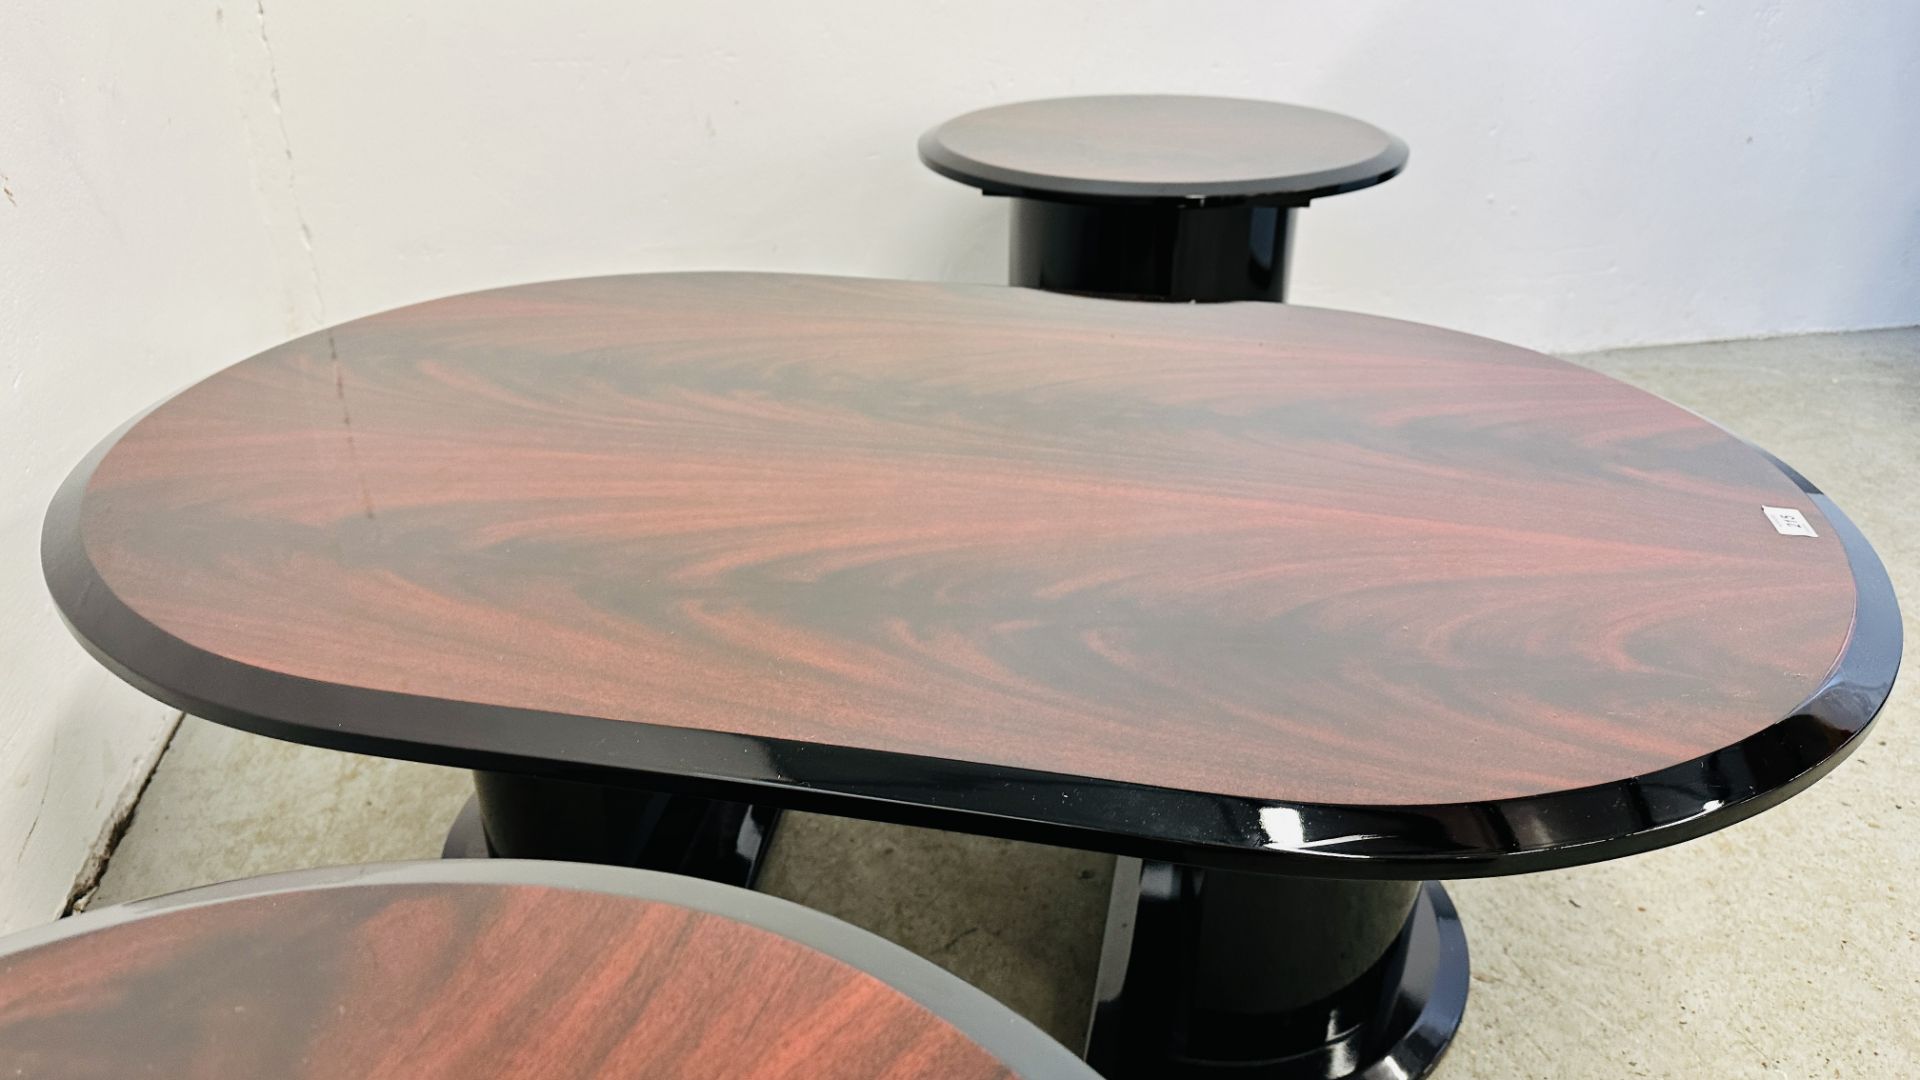 3 MATCHING DESIGN HIGH GLOSS MAHOGANY FINISH COFFEE TABLES INCLUDING A PAIR OF CIRCULAR AND 1 OVAL. - Bild 8 aus 16